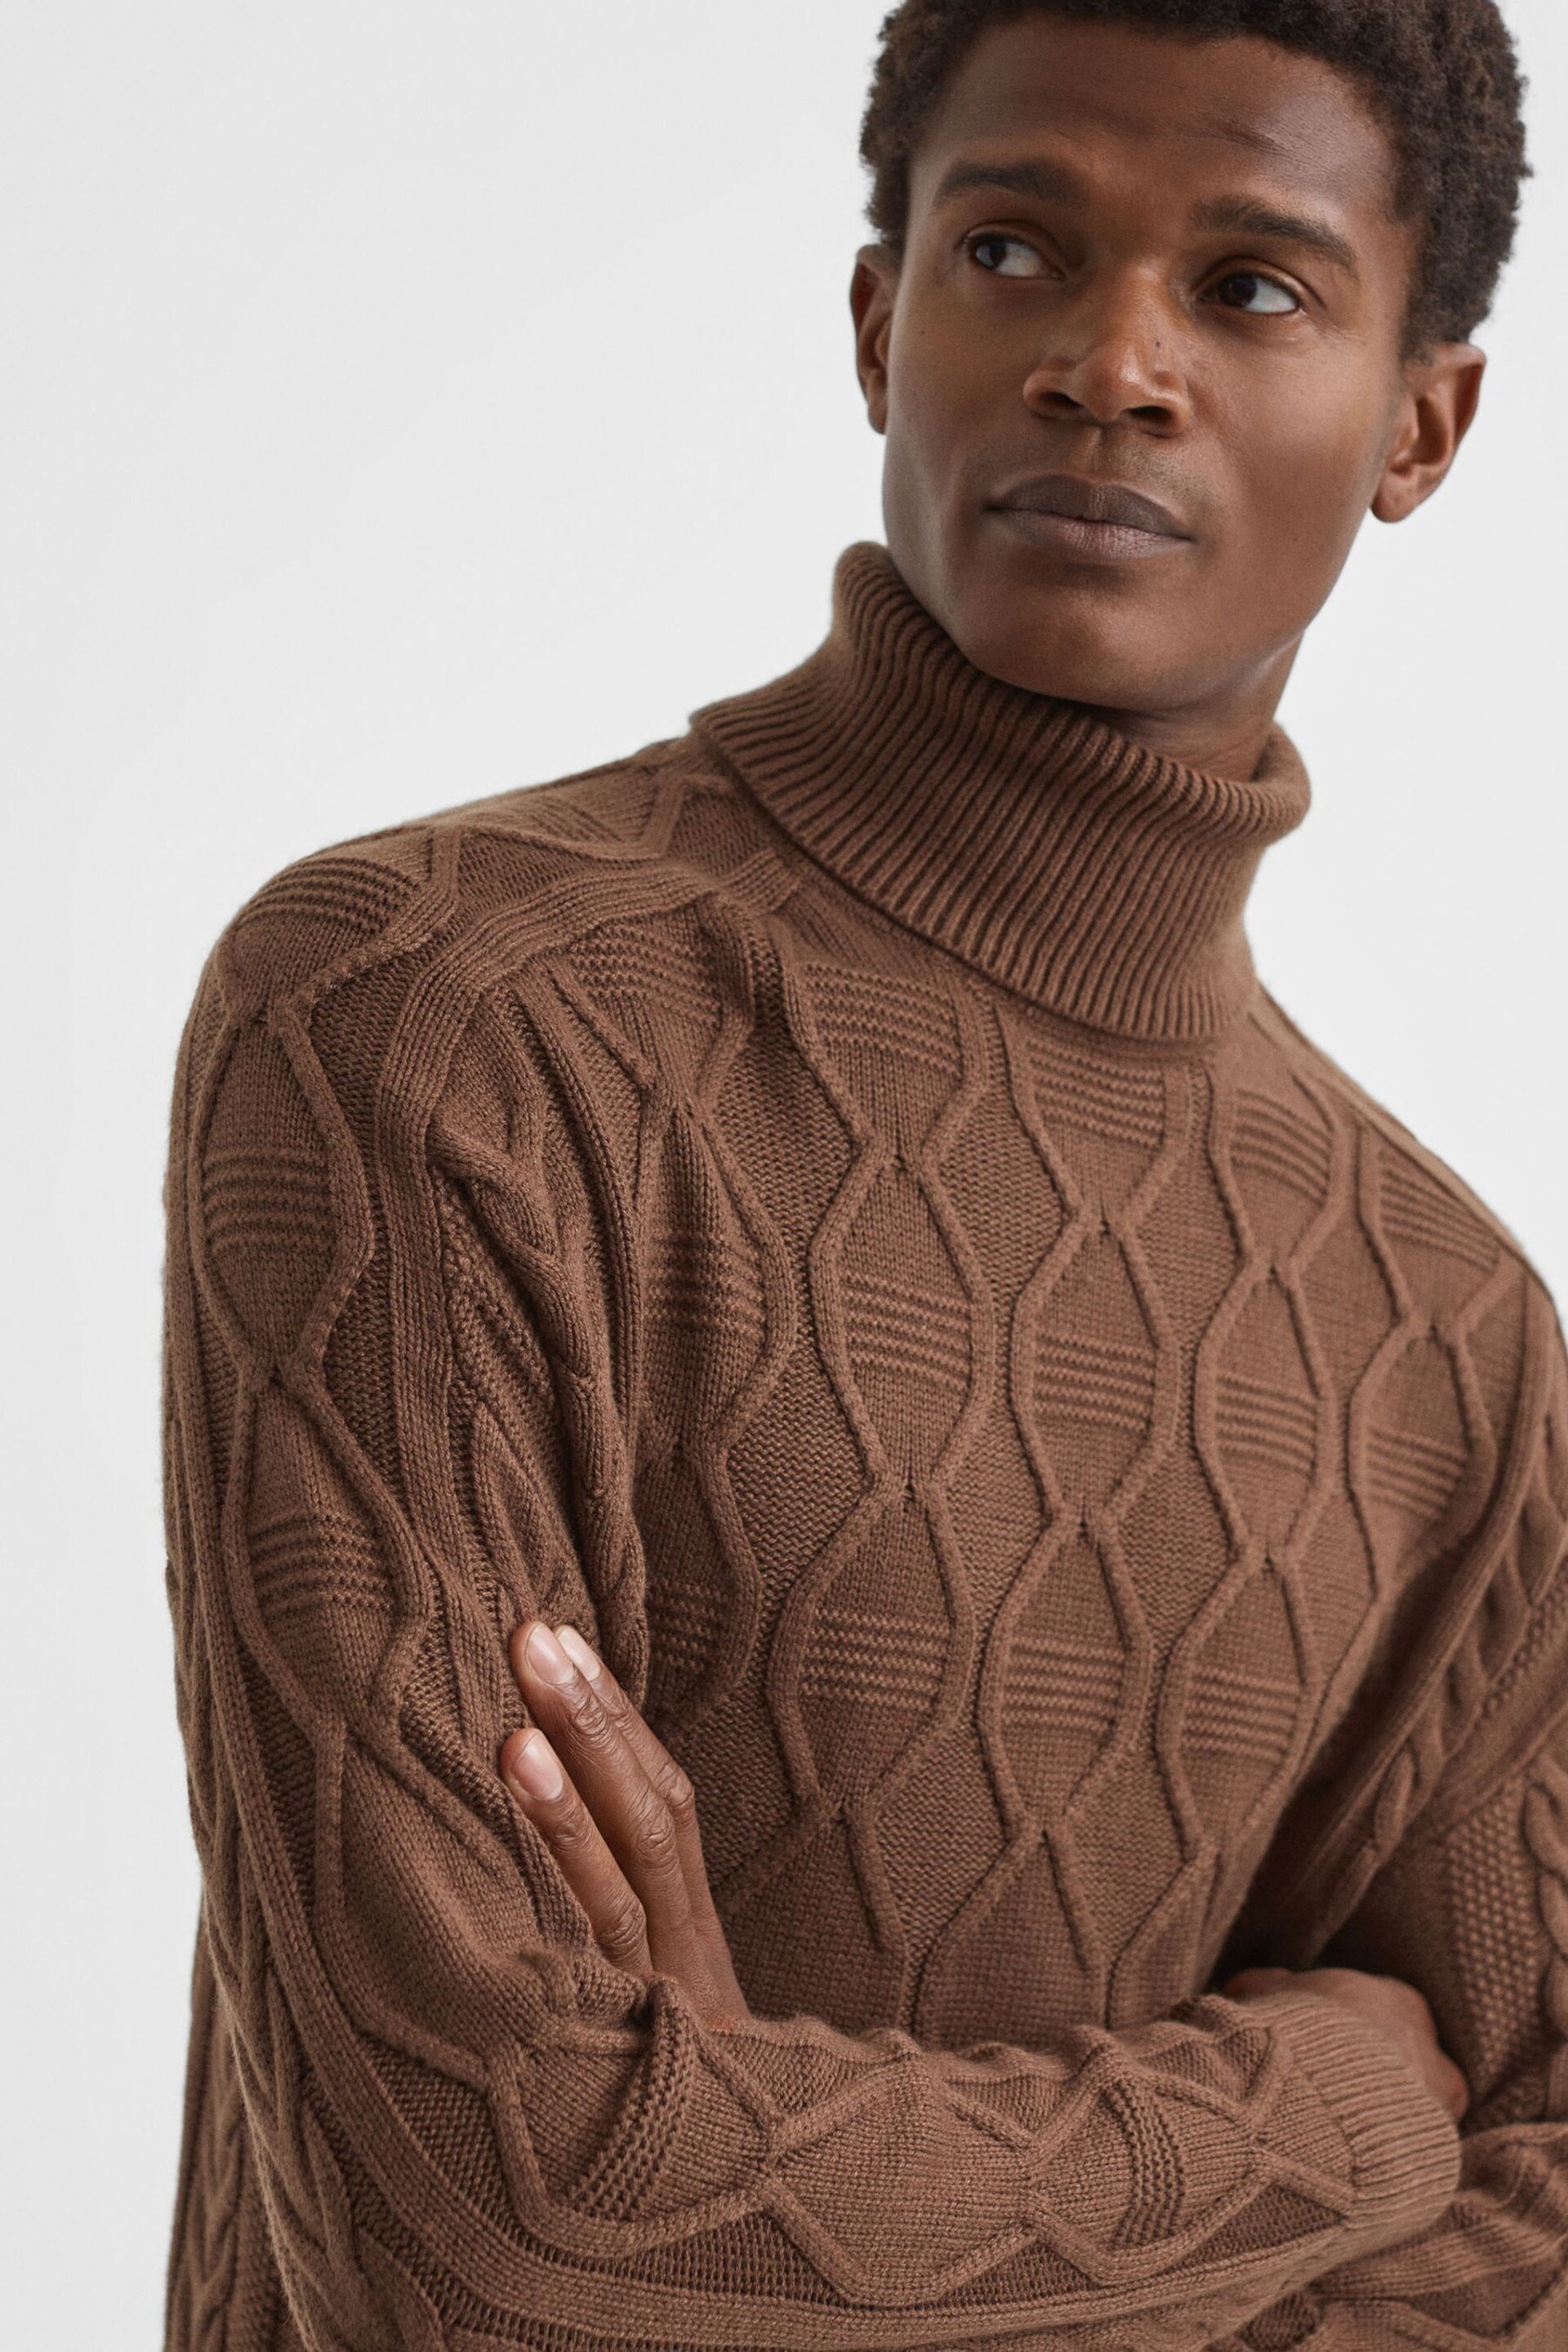 Reiss Tobacco Alston Cable Knitted Roll Neck Jumper - Image 1 of 5